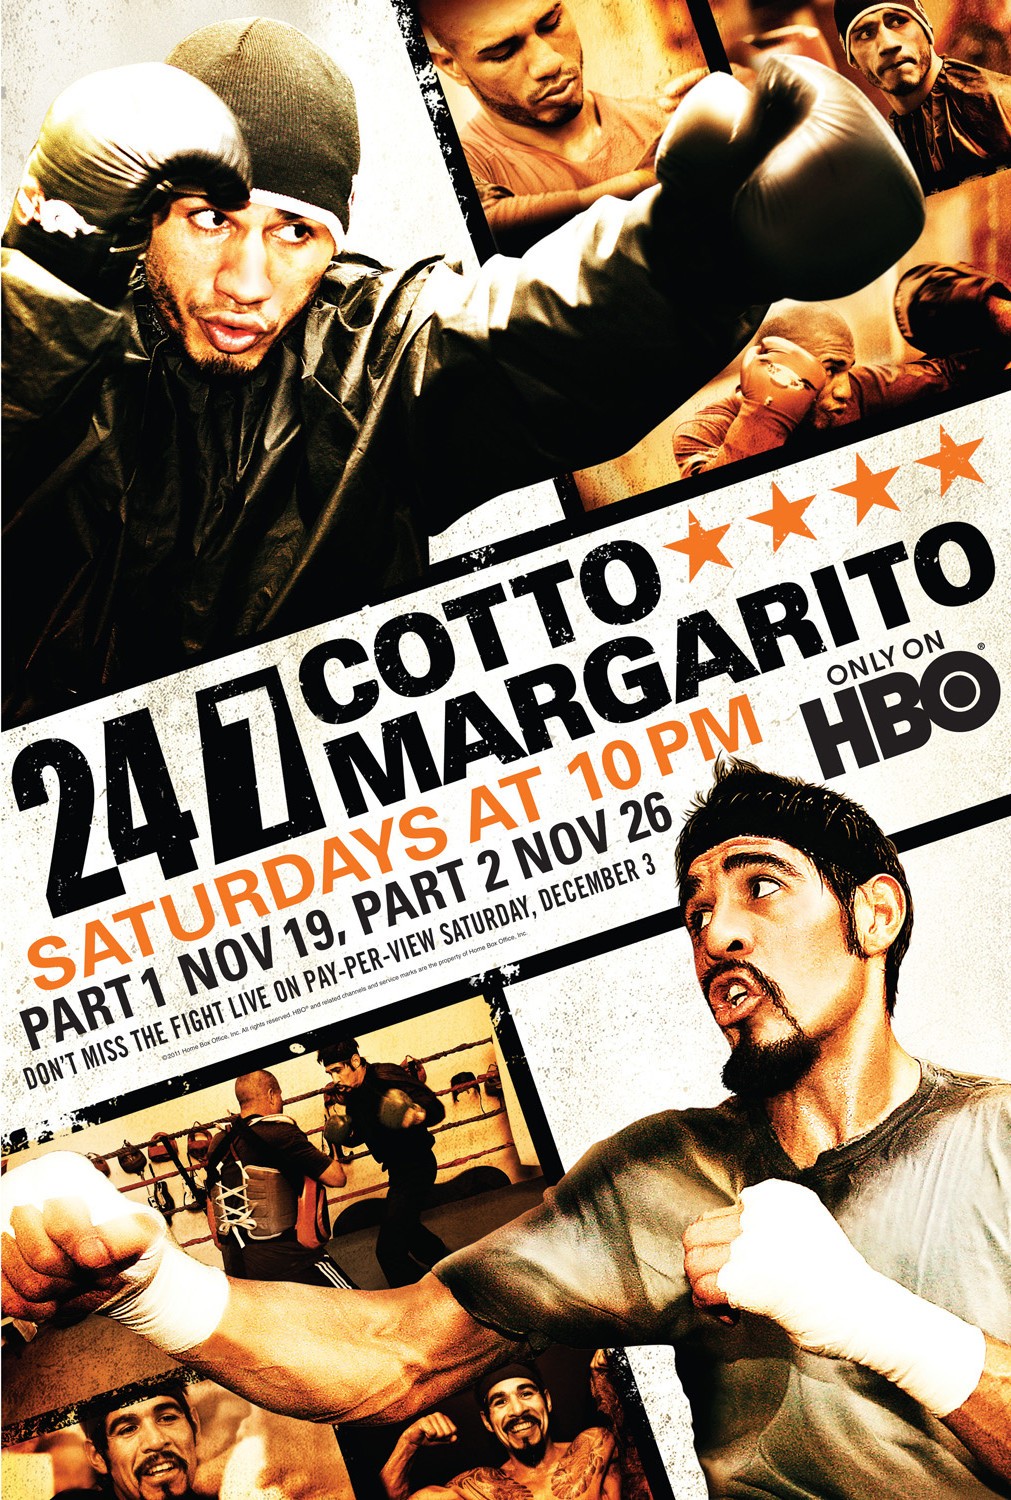 Extra Large TV Poster Image for 24/7: Cotto vs. Margarito 